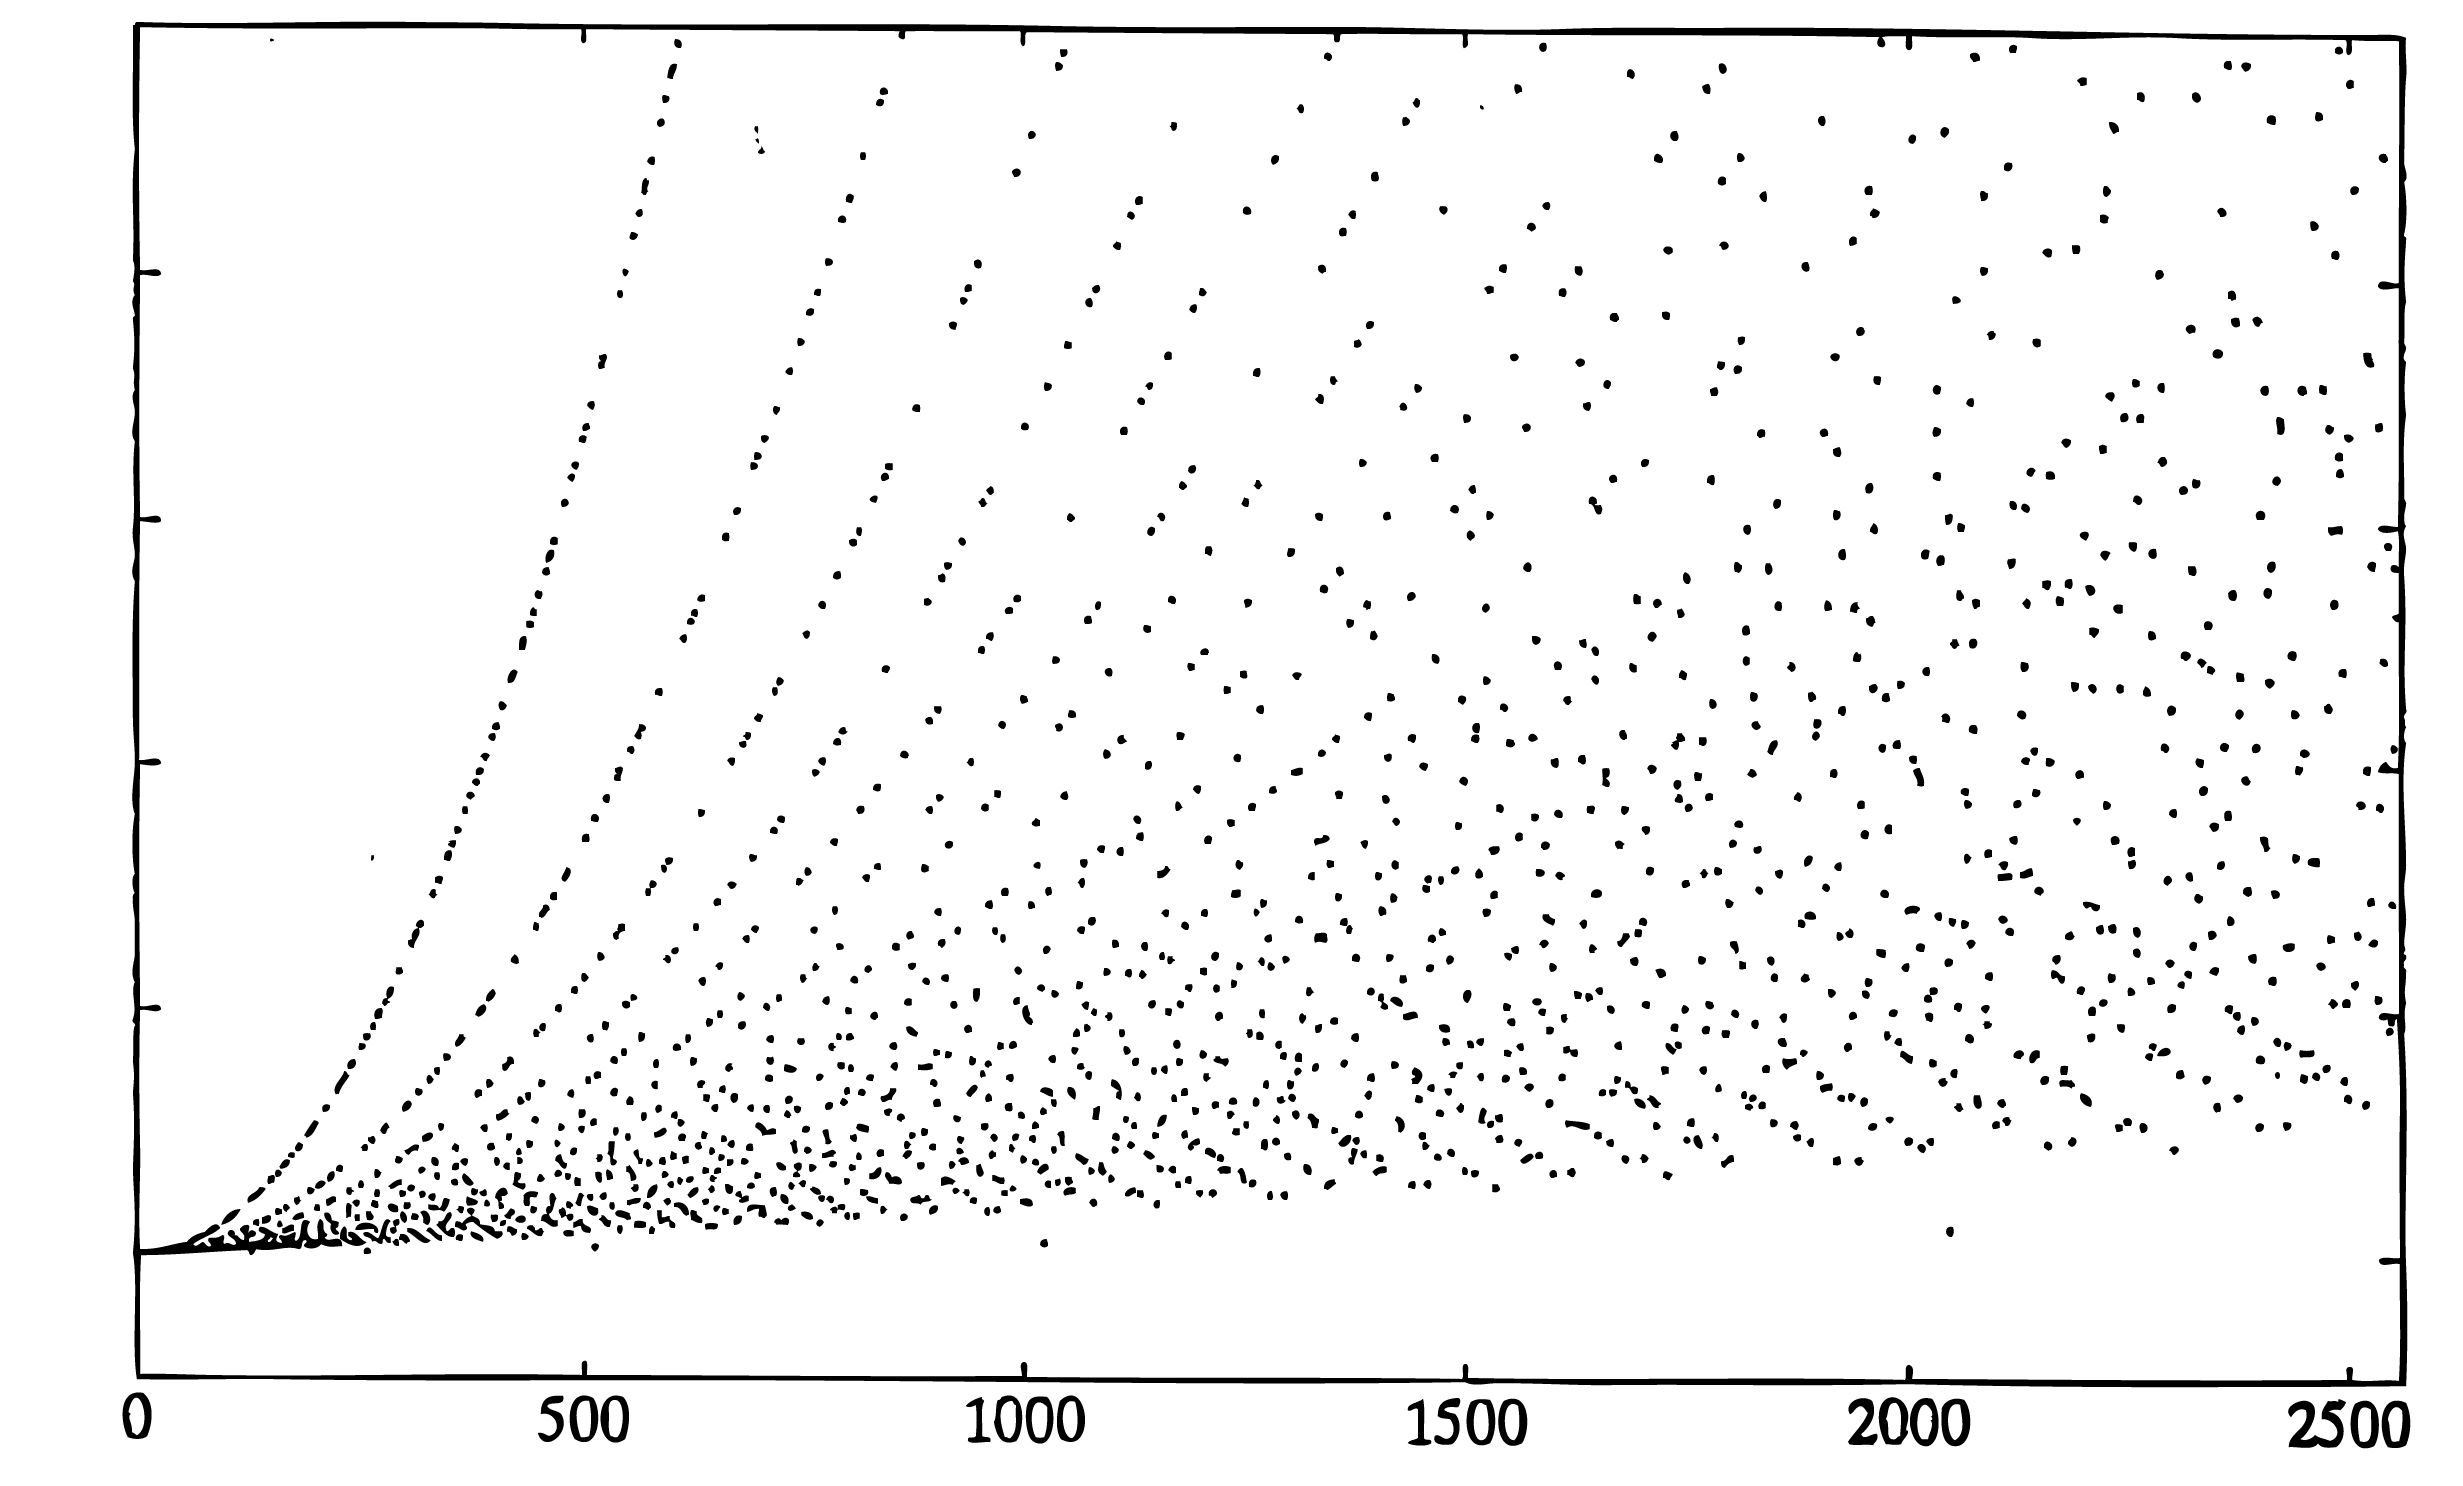 This figure is a plot with an unlabeled vertical axis with eight incremental markings for reference and a horizontal axis ranging in value from 0 to 1000 in increments of 200. The graph contains a series of plotted dots that follow a clearly discernible pattern. From the first marking on the vertical axis and from 0 to approximately 50 on the horizontal axis, all dots are so close together that they form a nearly solid line. After this point, the dots spread out, and they strongly follow numerous curves. Each curve moves to the right and begins increasing at an increasing rate. A handful of curves increase in slope sharply so that they are separated from the rest, but the majority of the curves that do not increase quickly are so close together that they almost appear as just a jumbled mess of dots. The majority of the lines cross an imaginary vertical halfway point before they have progressed horizontally three-fourths of the way across the graph.